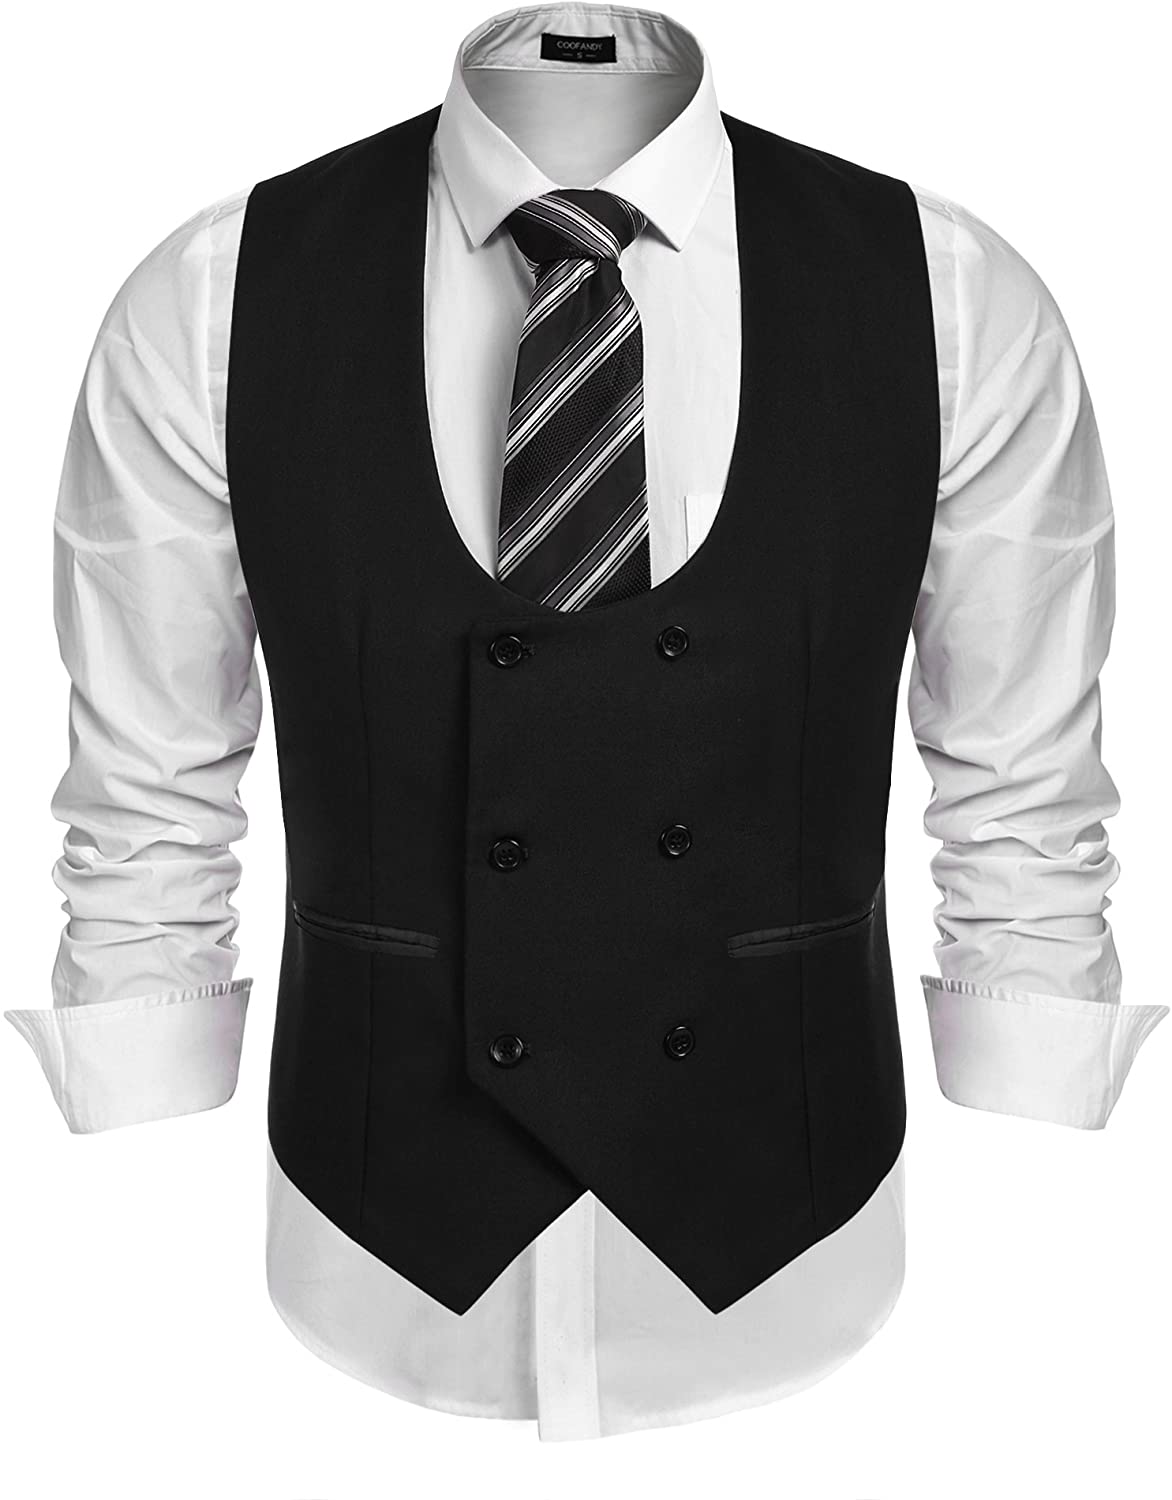 Coofandy Mens Waistcoat Casual Slim Fit Double Breasted Plaid Waistcoat Vest with Pocket for Wedding/Business/Party 